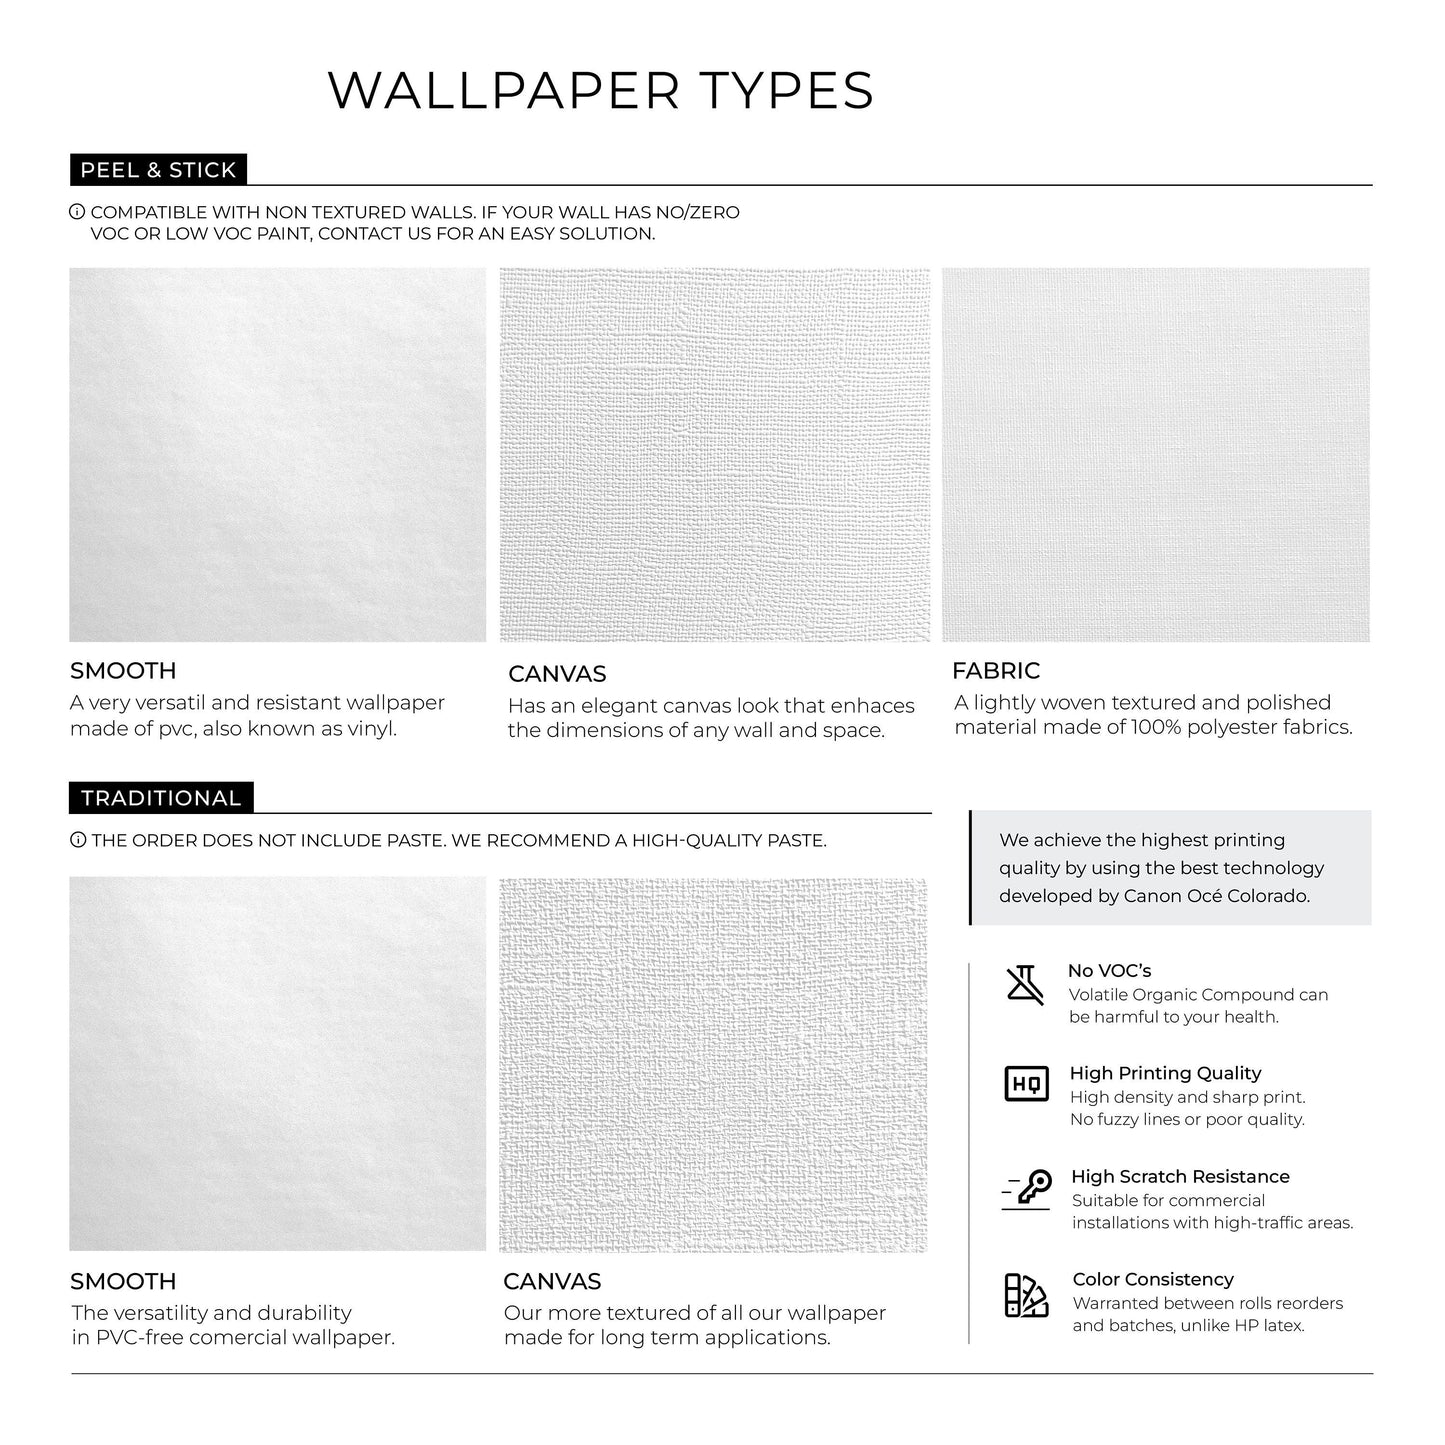 Tribal Forms Wallpaper - Removable Wallpaper Peel and Stick Wallpaper Wall Paper Wall - B319